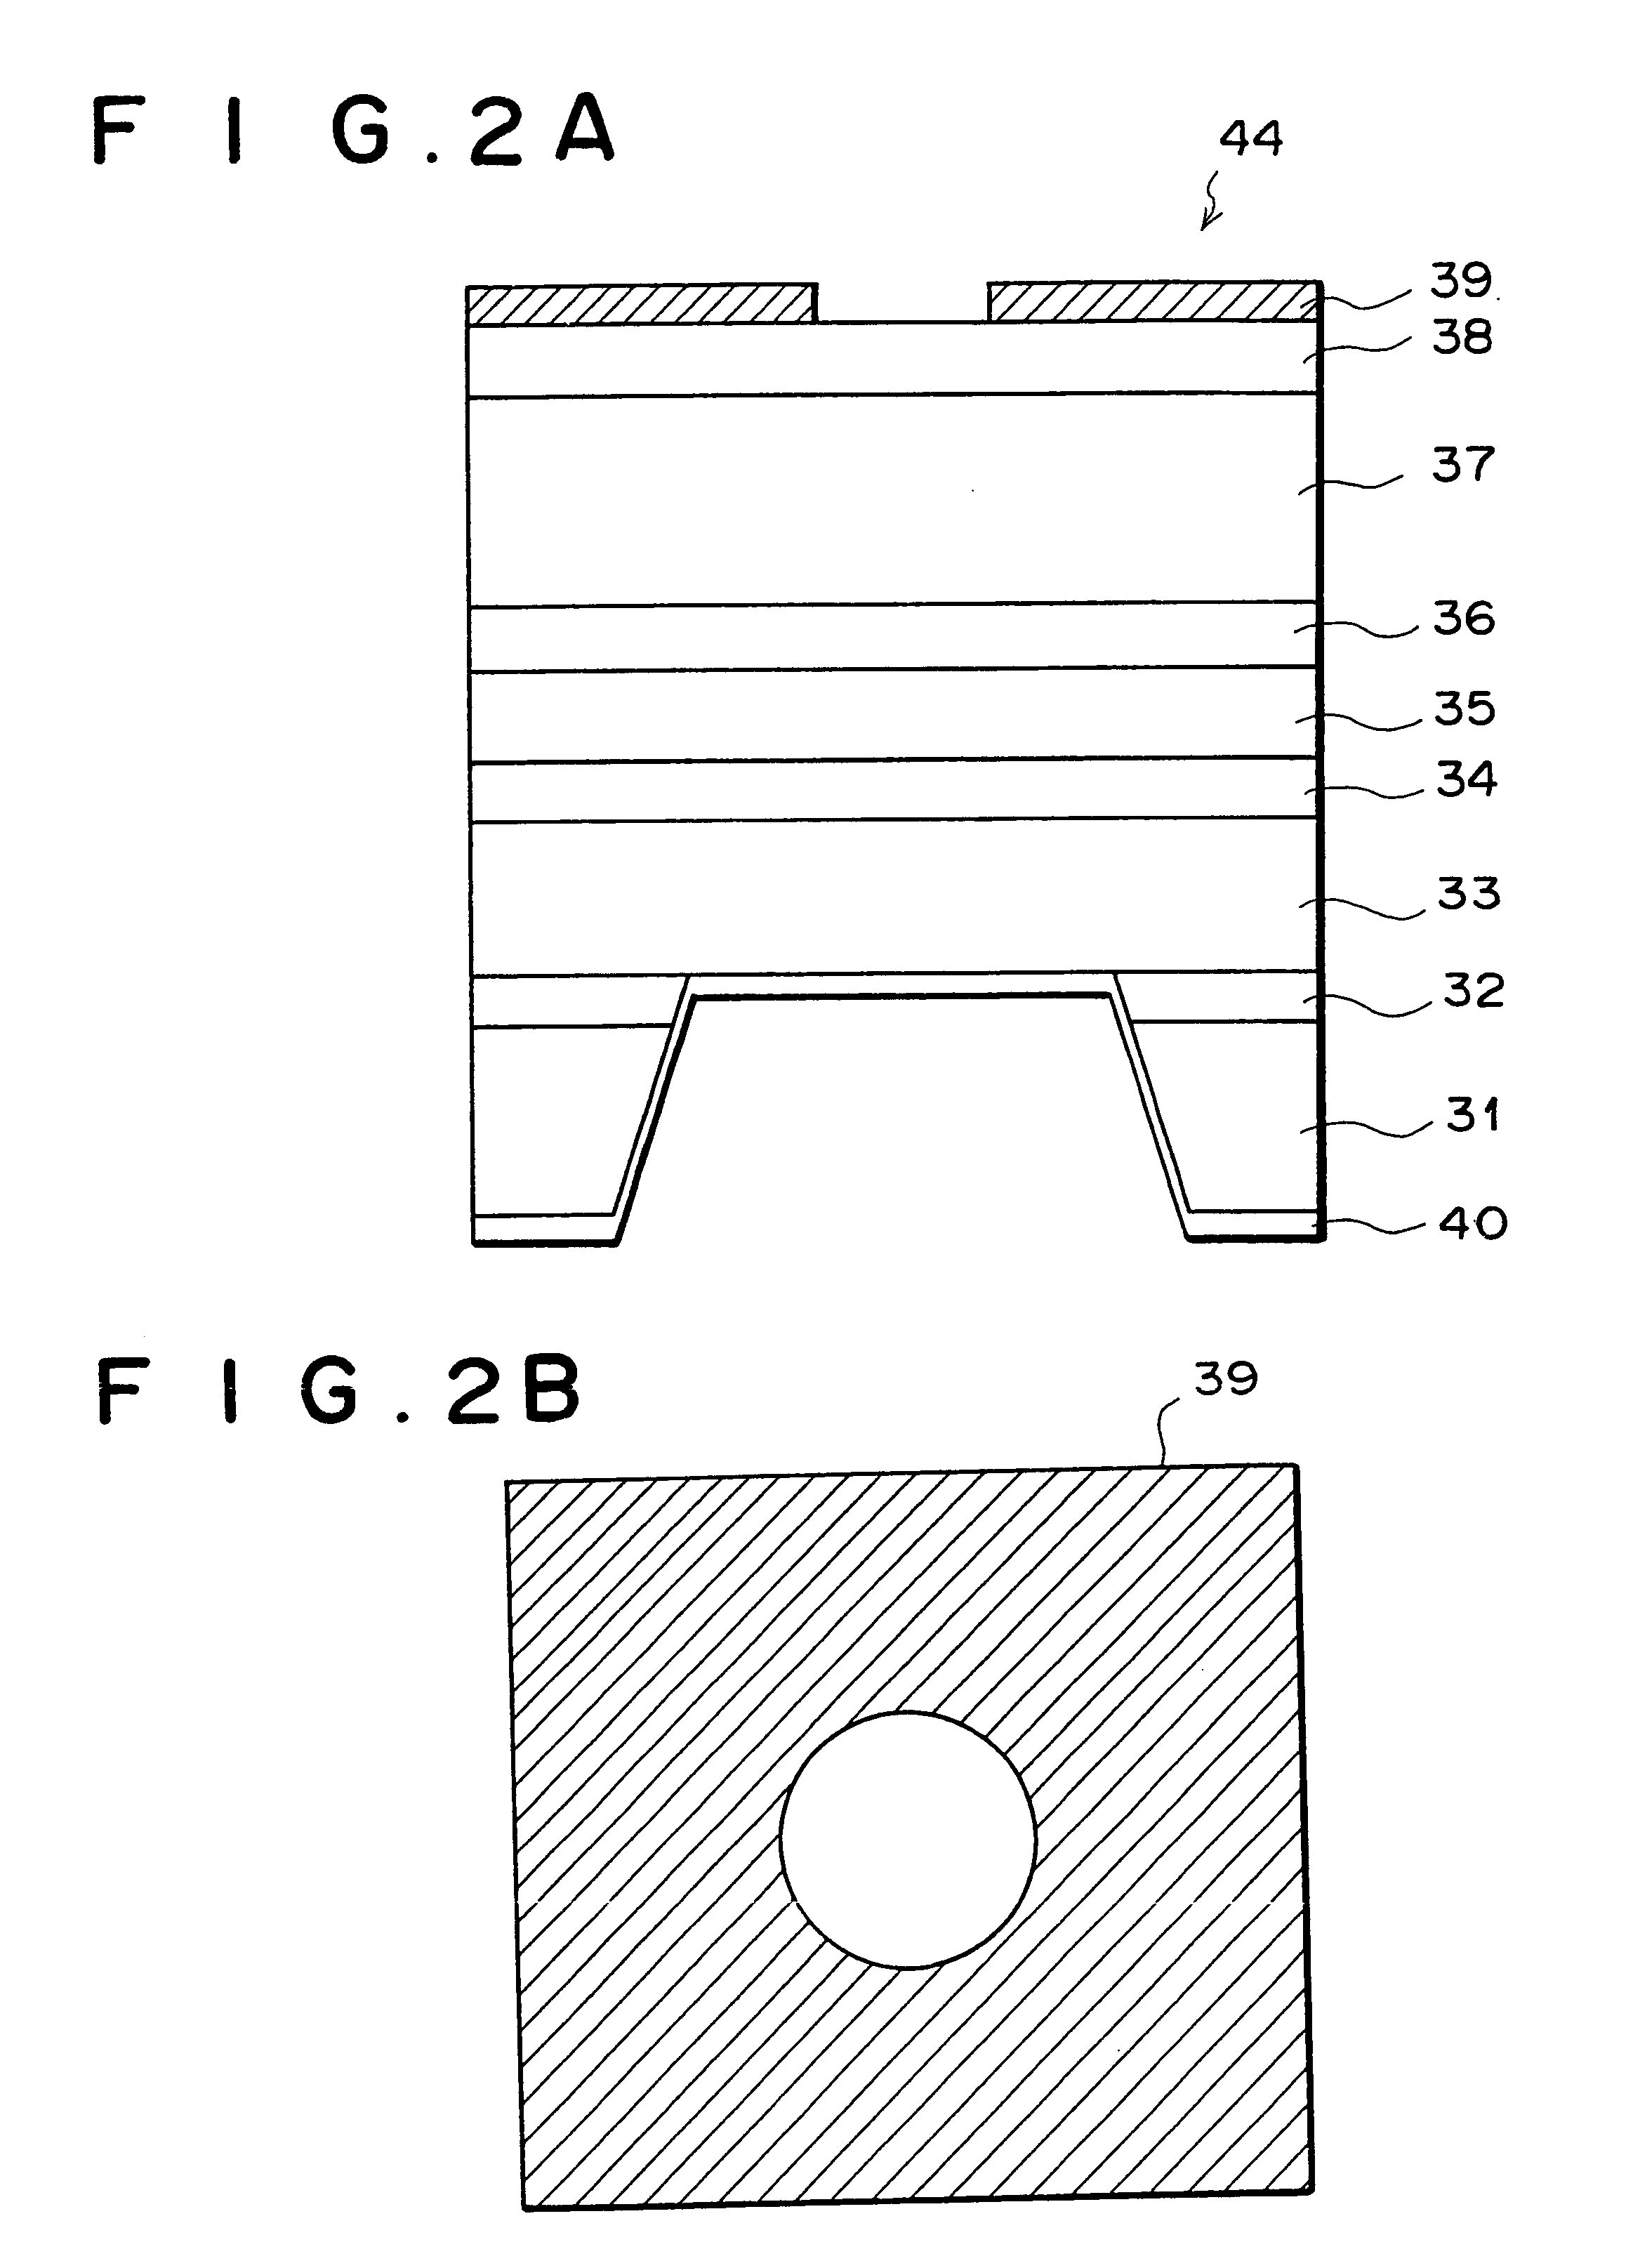 Laser apparatus in which surface-emitting semiconductor is excited with semiconduct laser element and high-order oscillation modes are suppressed